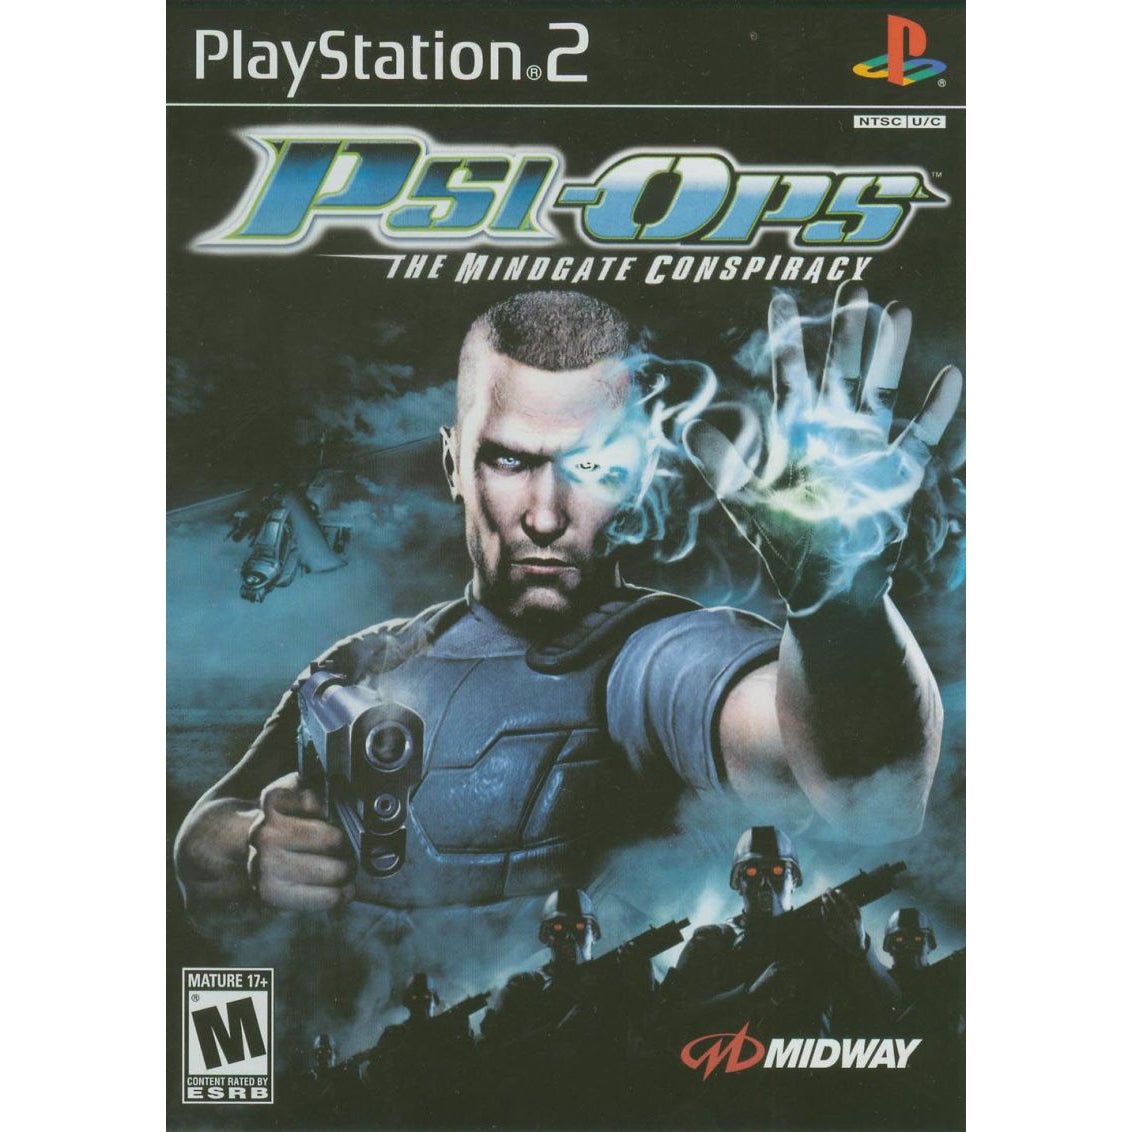 Psi-Ops: The Mindgate Conspiracy - PlayStation 2 (PS2) Game Complete - YourGamingShop.com - Buy, Sell, Trade Video Games Online. 120 Day Warranty. Satisfaction Guaranteed.